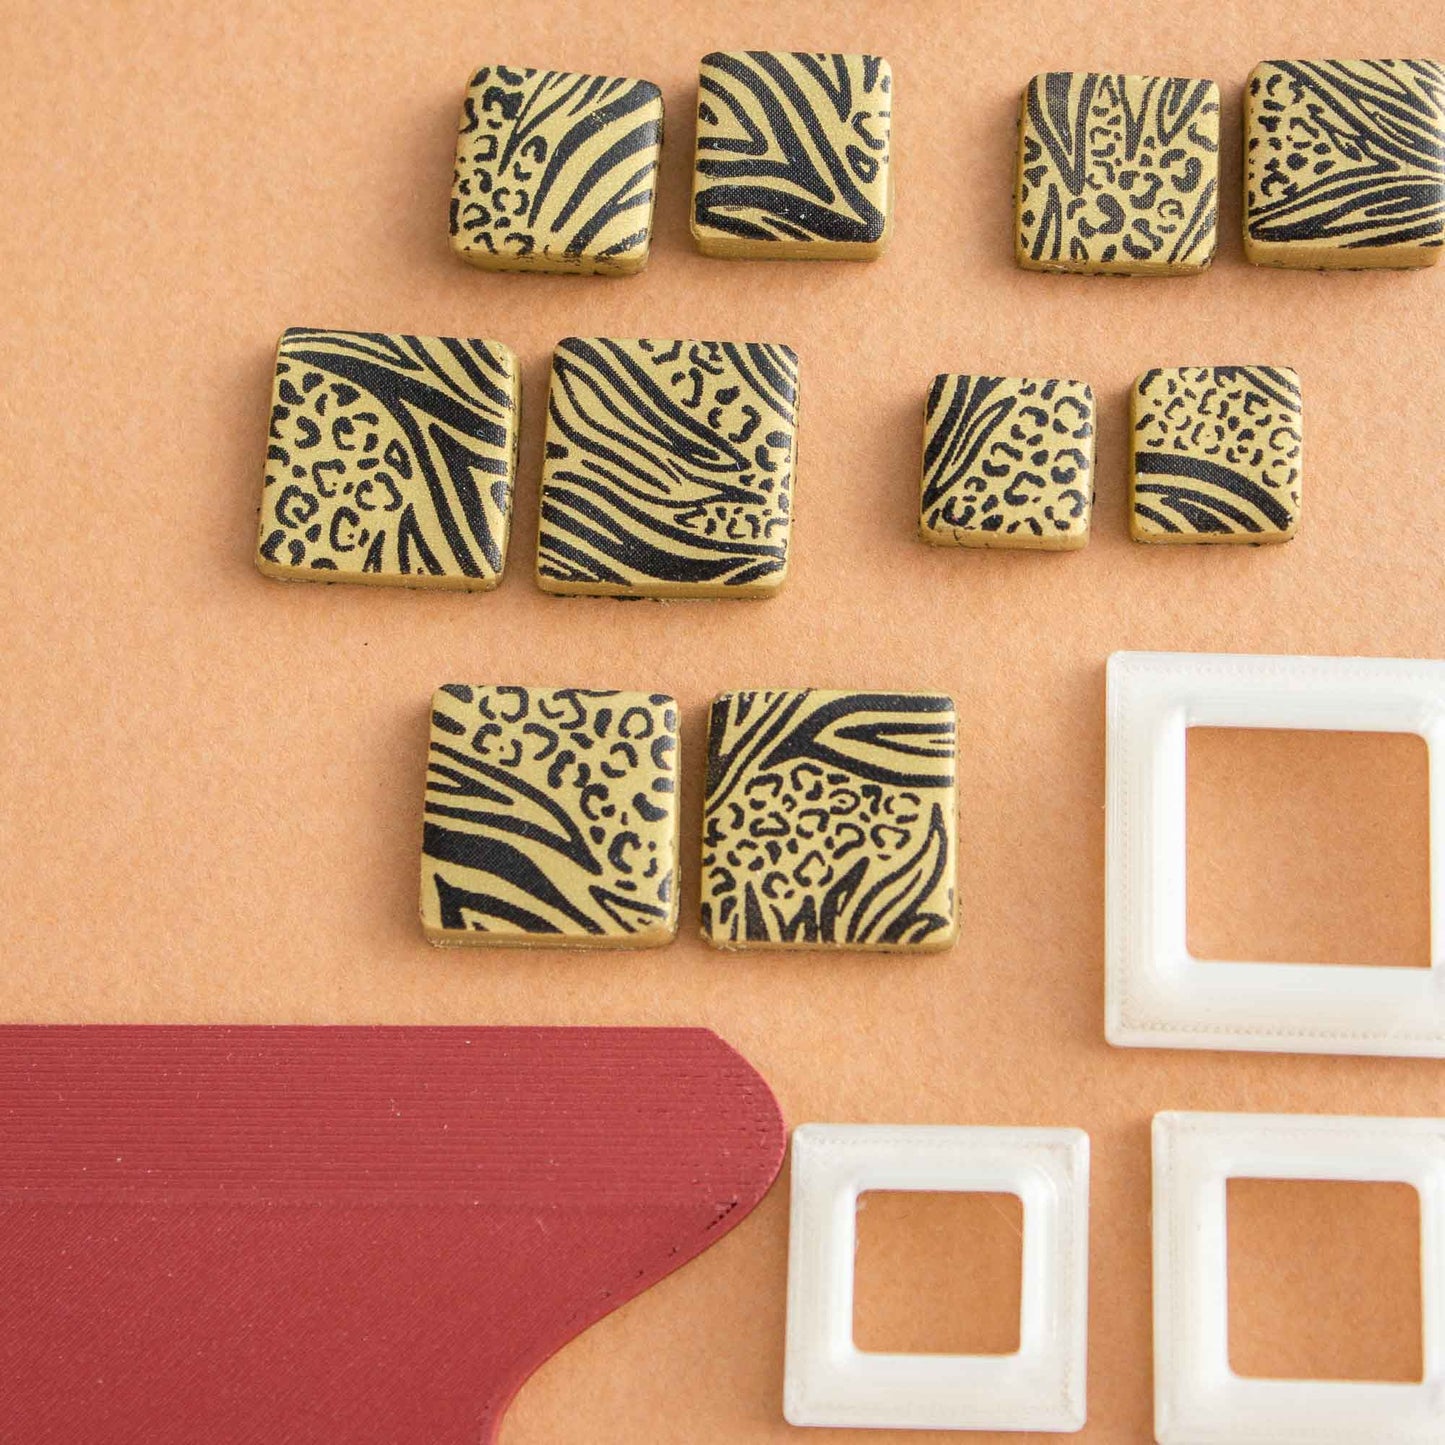 close up of 1 Animal pattern small silkscreen, some square animal printed polymer clay shapes, 3 square cutters for clay and one squeegee on a light brown background